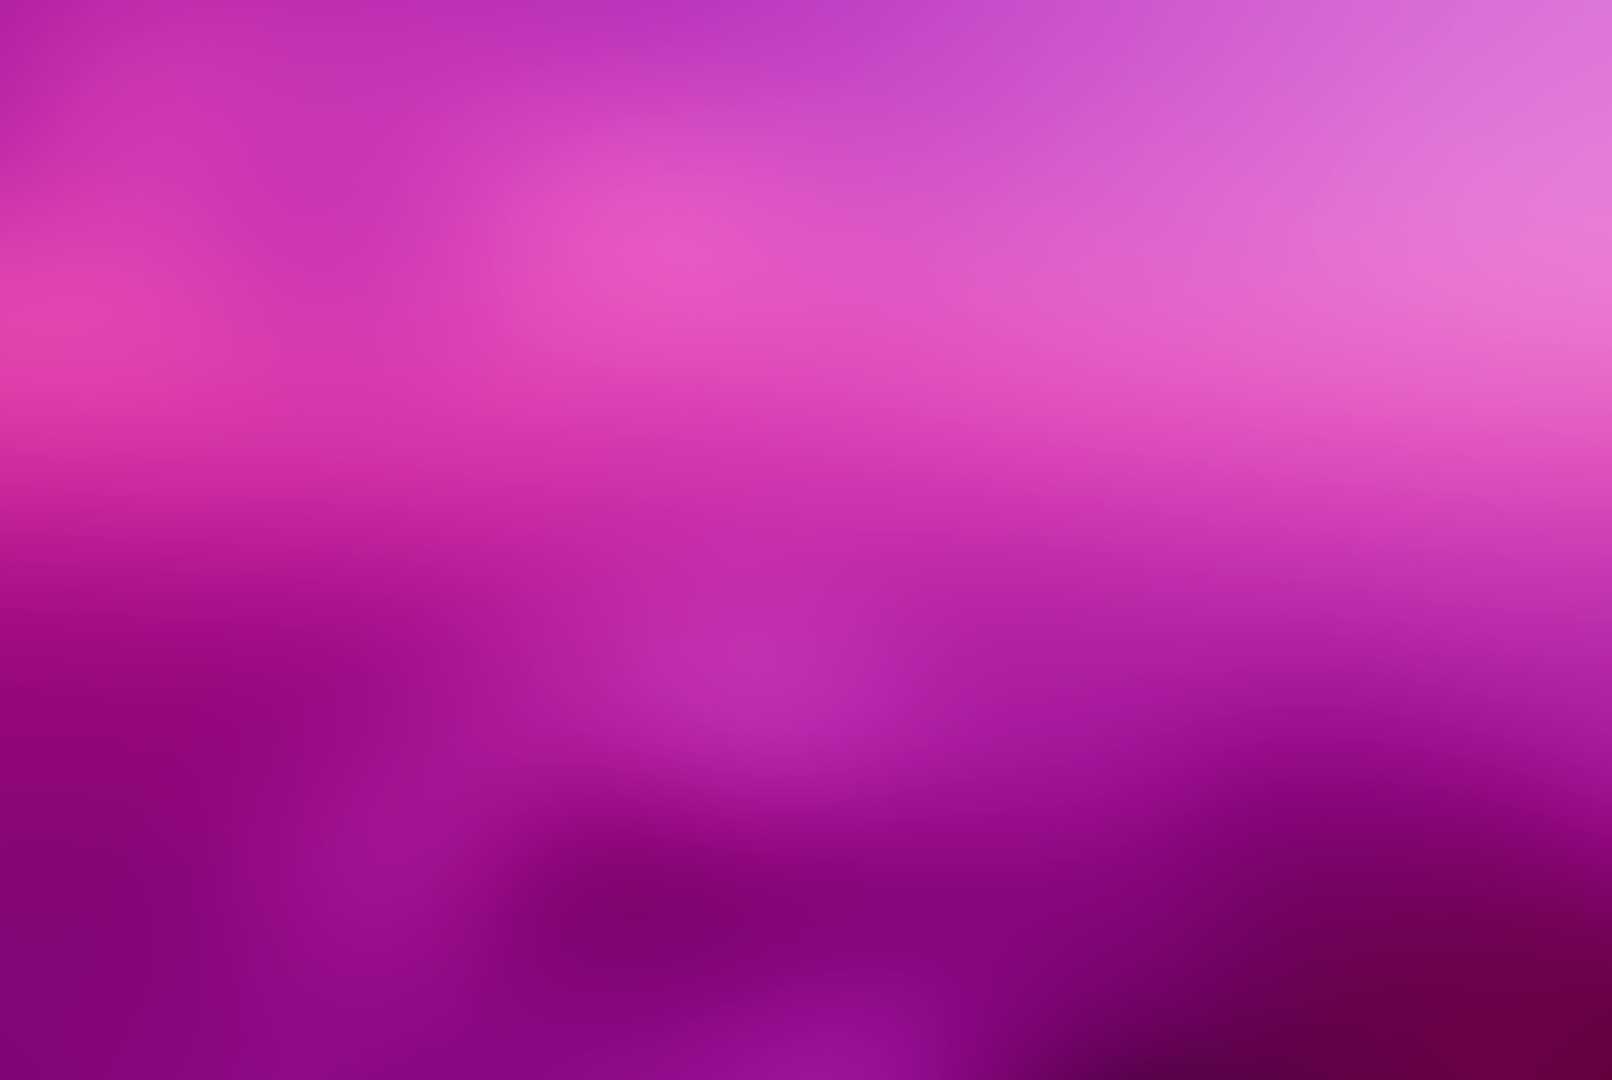 Fuschia and Pink Background Image